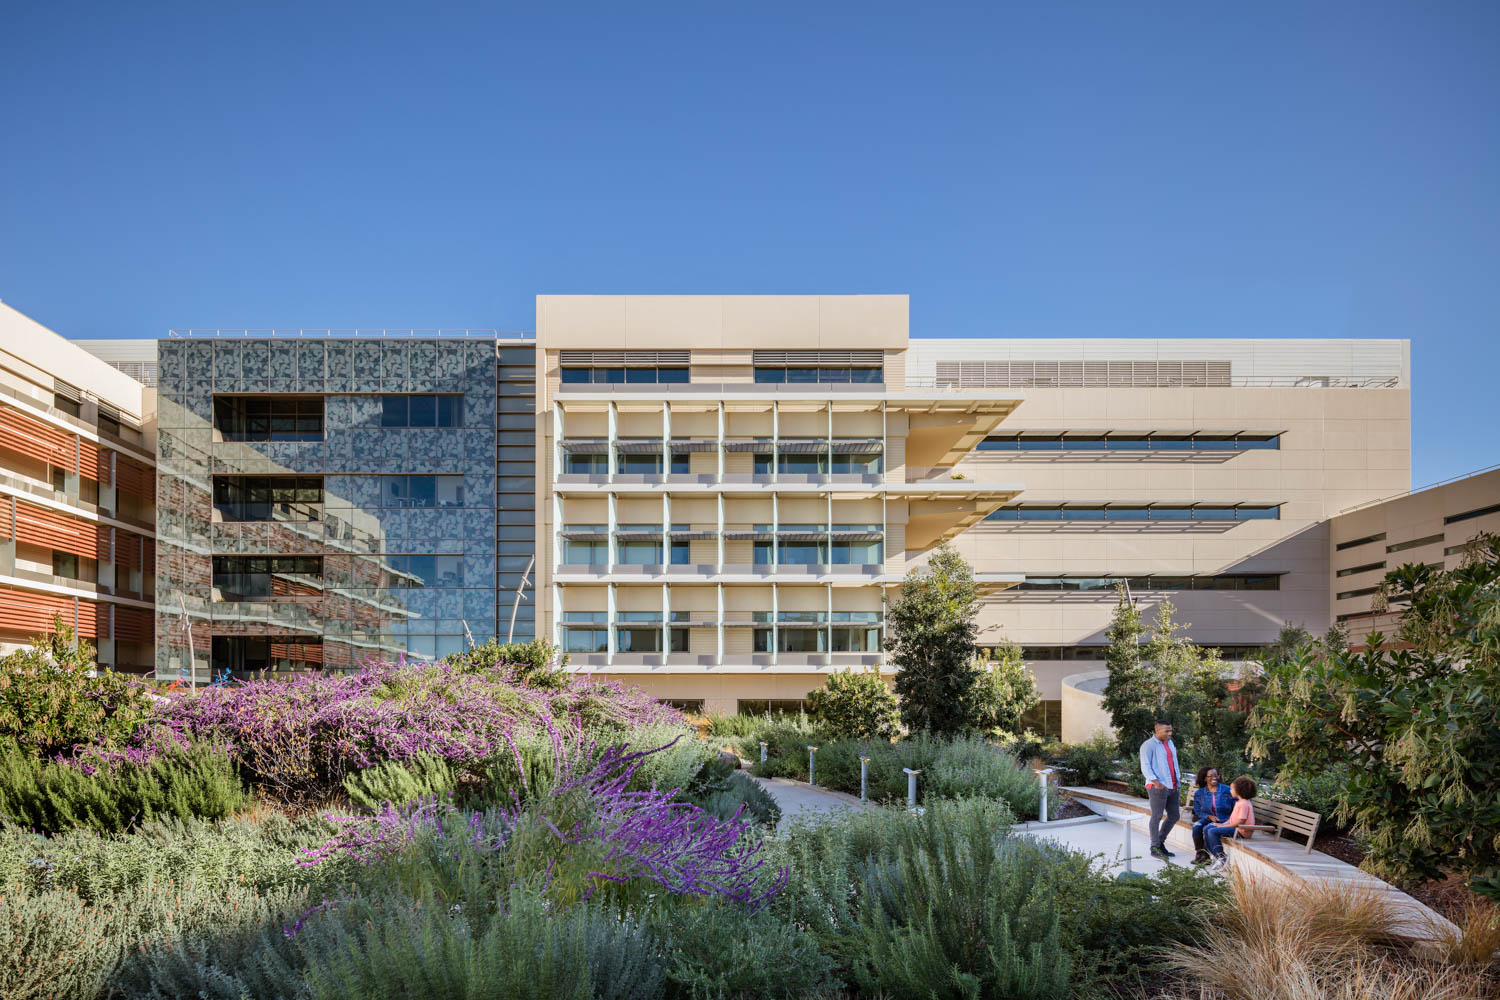 the exterior of Lucile Packard Children's Hospital